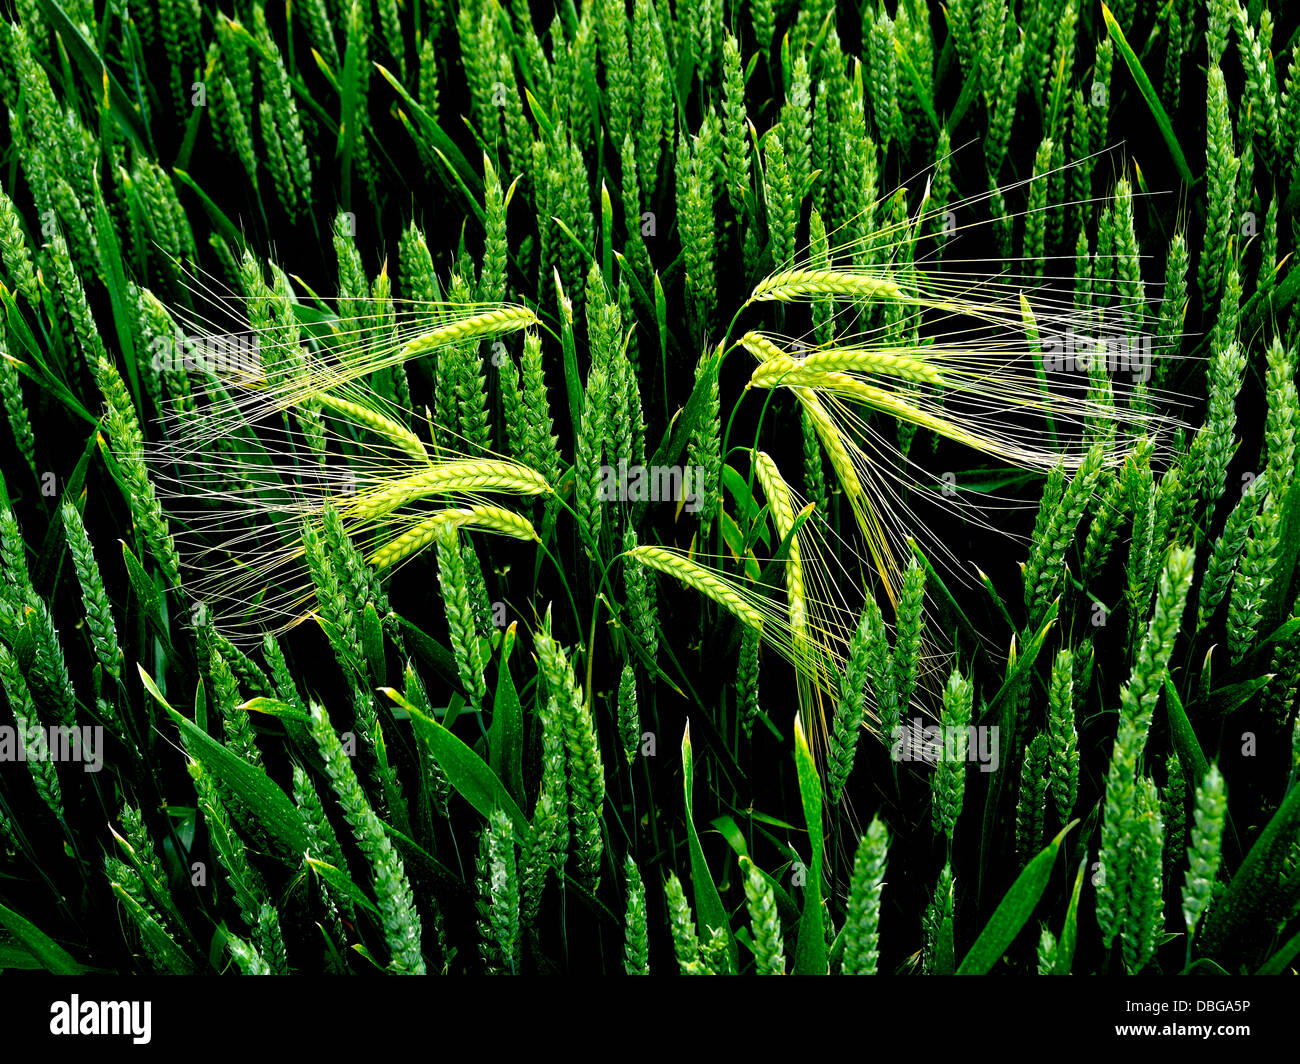 BARLEY GROWING IN A WHEAT FIELD MIXED FARMING Stock Photo